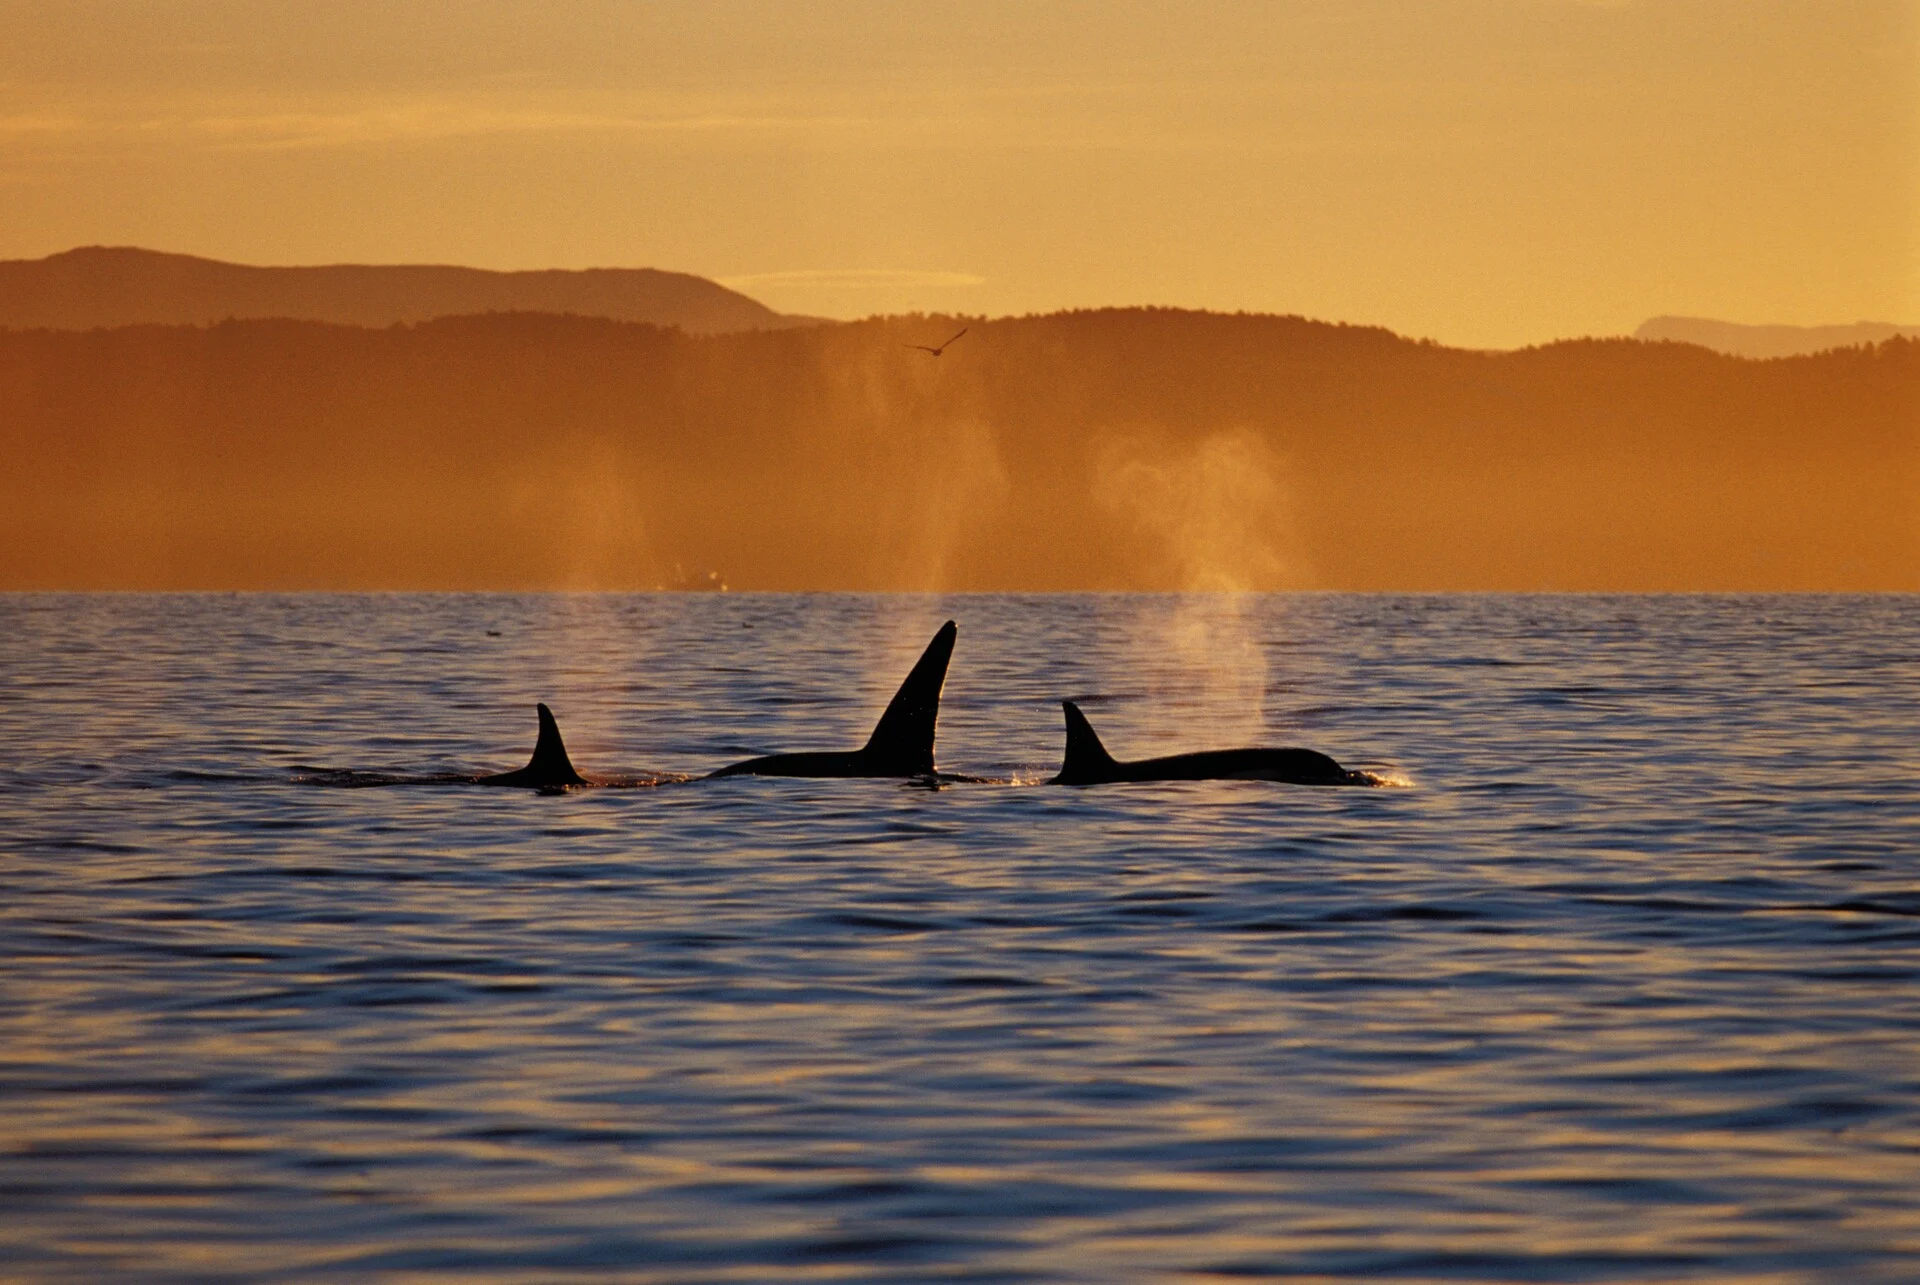 Killer whales (orcas) in the waters around the Lofoten Islands in Norway